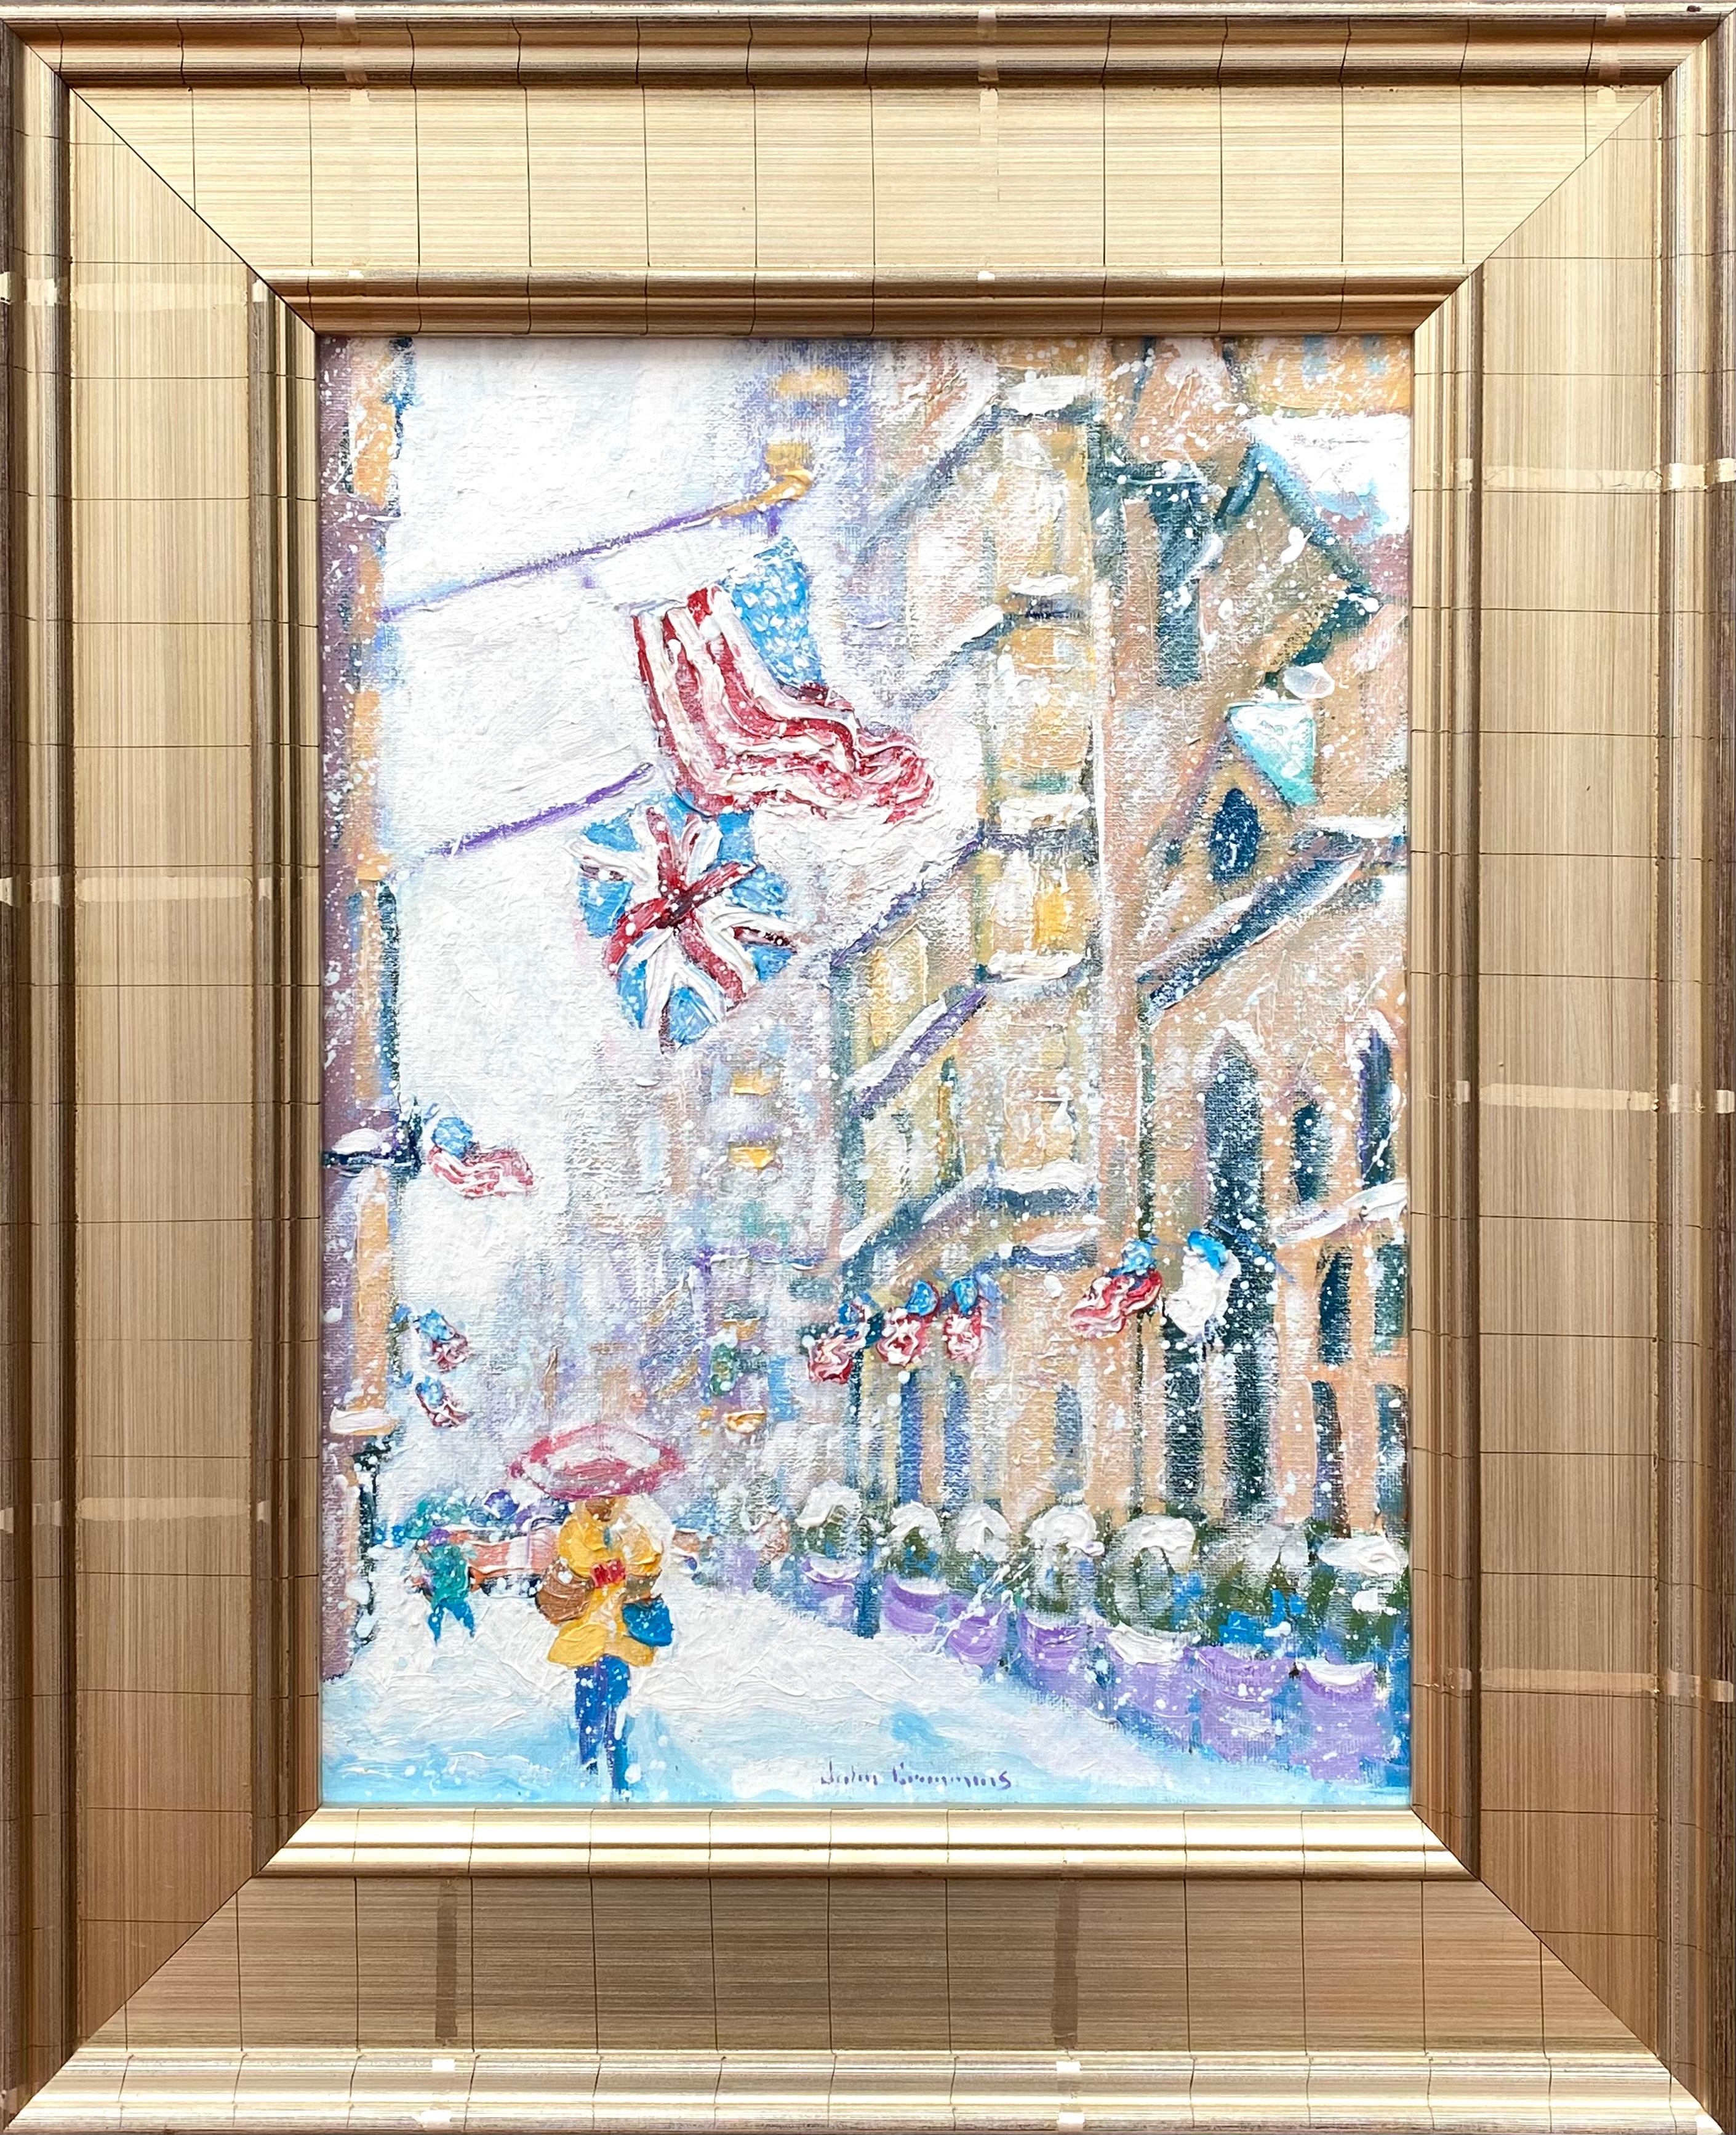 “Saks Fifth Avenue” - Gray Figurative Painting by John Crimmins